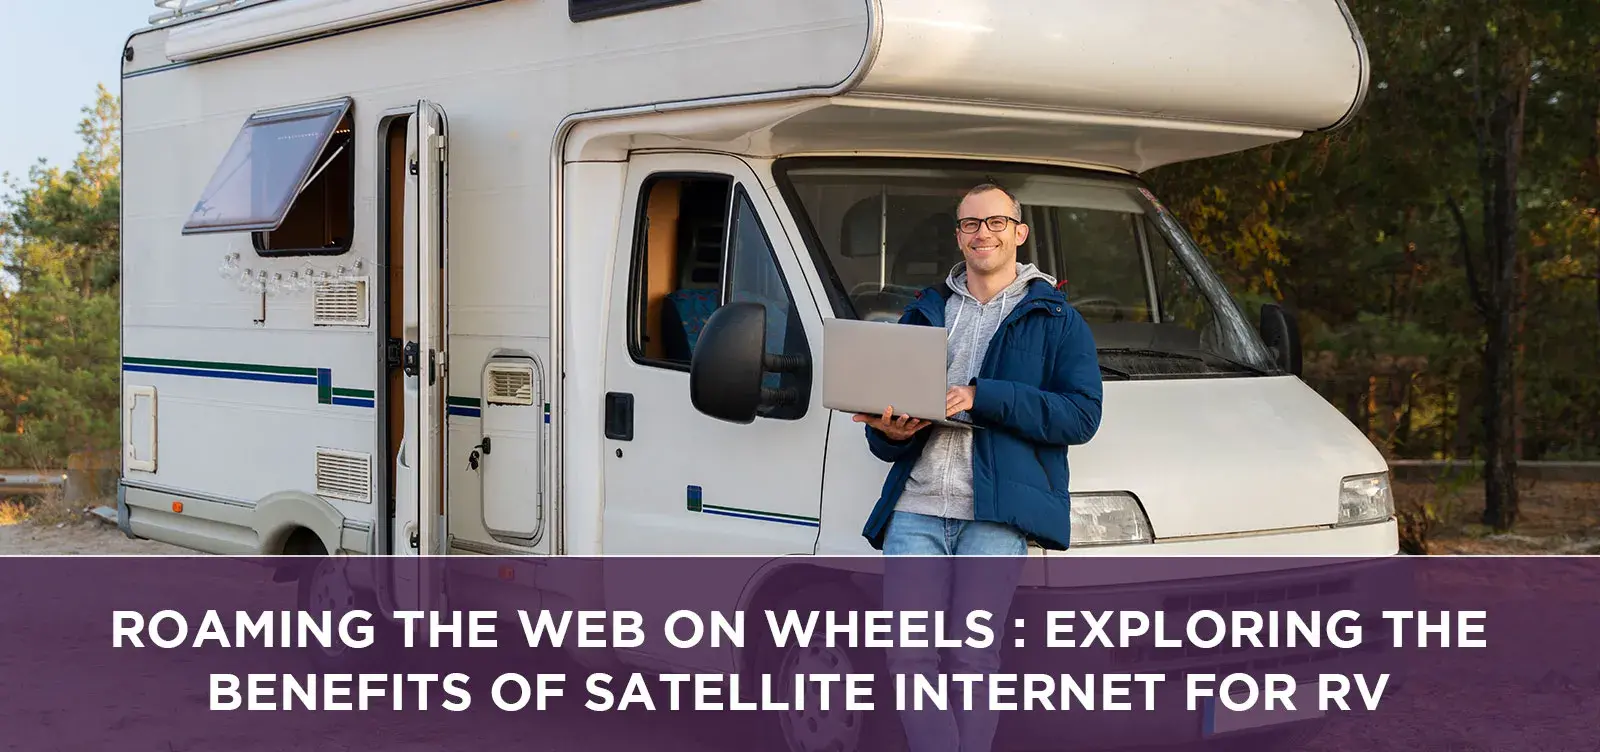 Roaming the Web on Wheels : Exploring the Benefits of Satellite Internet for RV